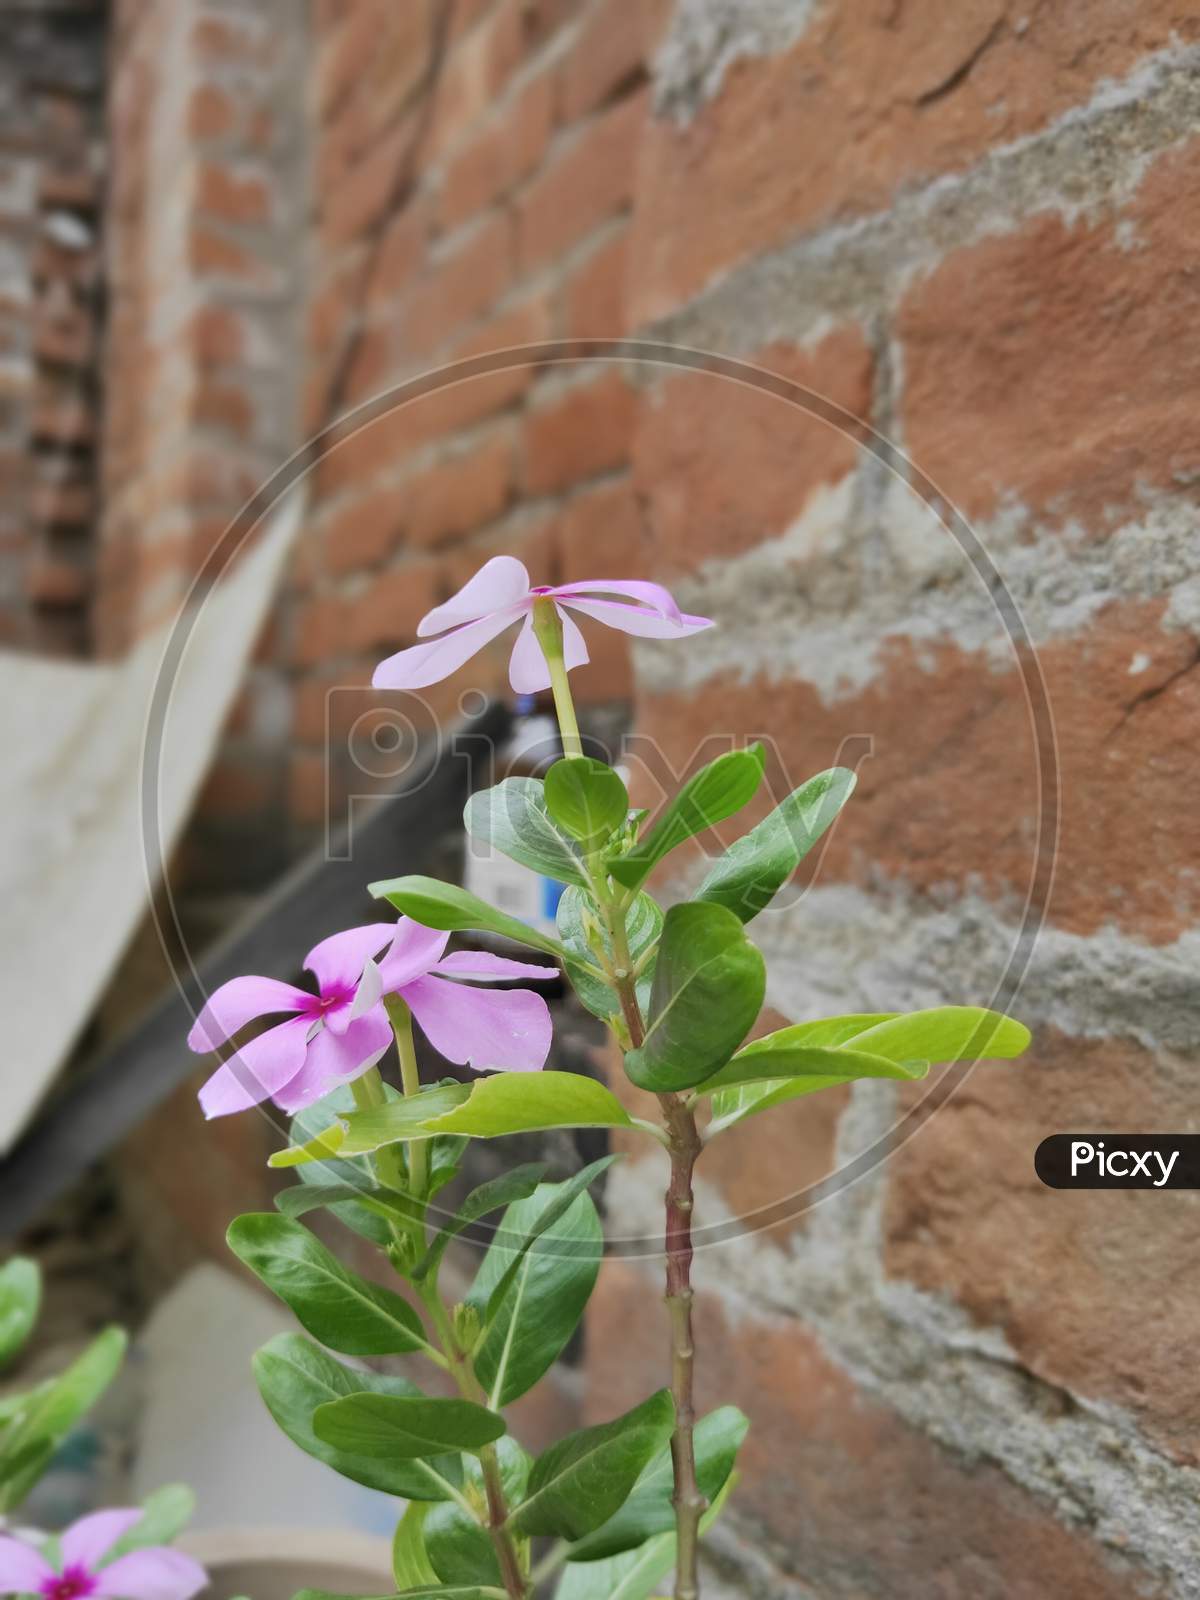 periwinkle plant with pink flowers, selective focus